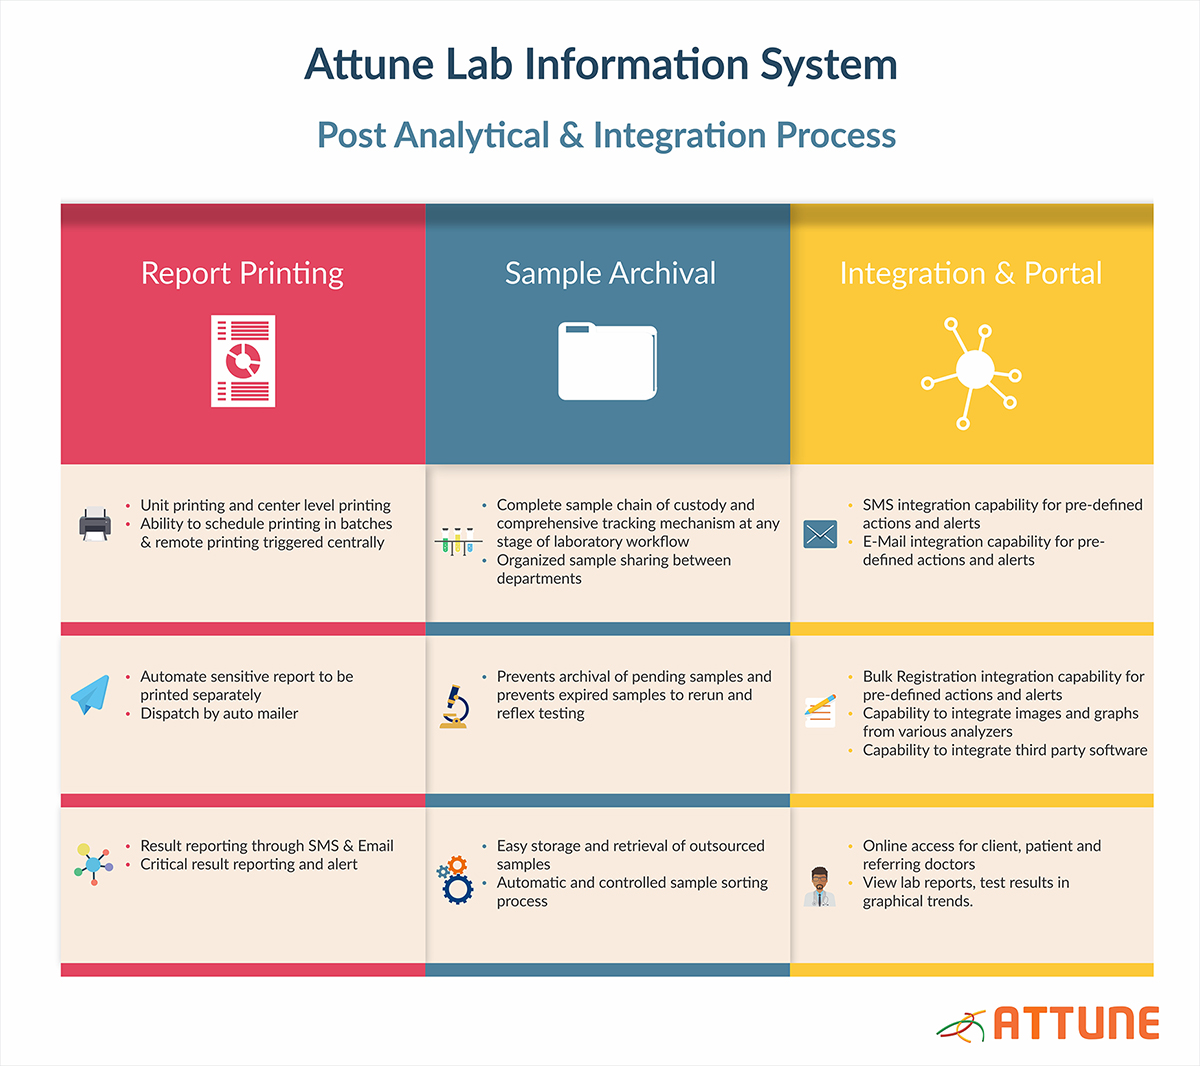 Attune LIS Post Analytical Infographic